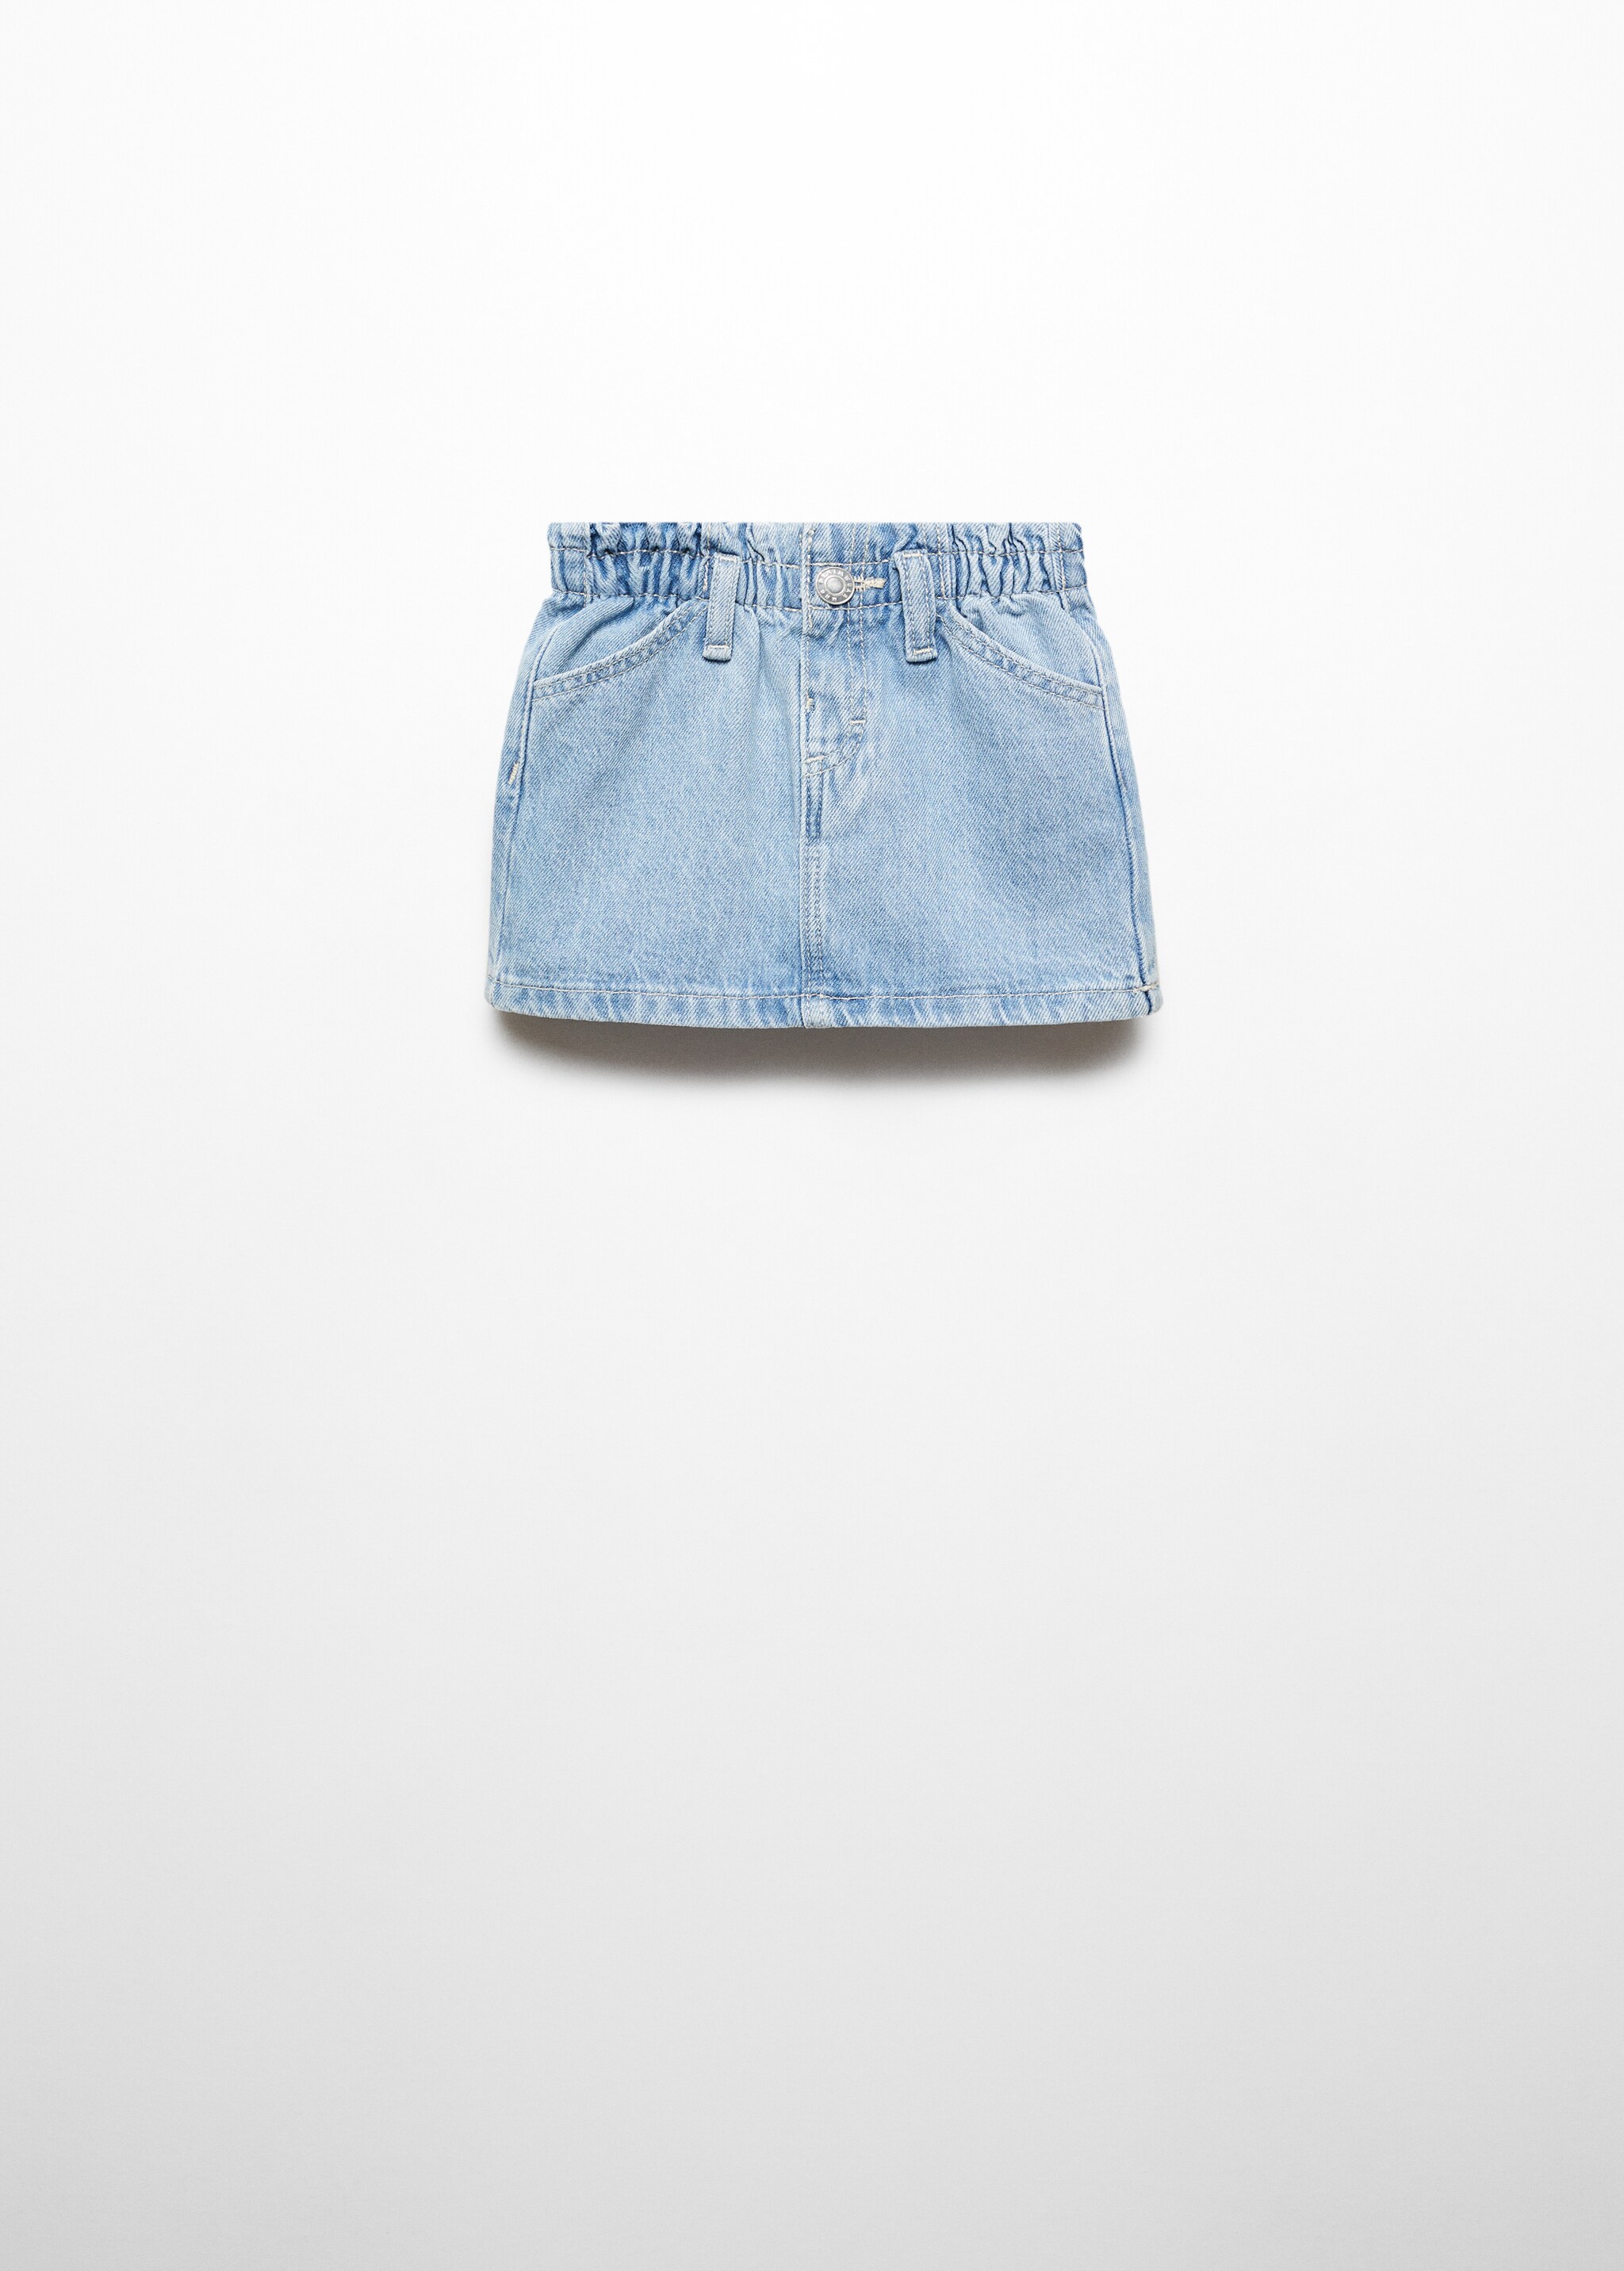 Paperbag denim skirt - Article without model